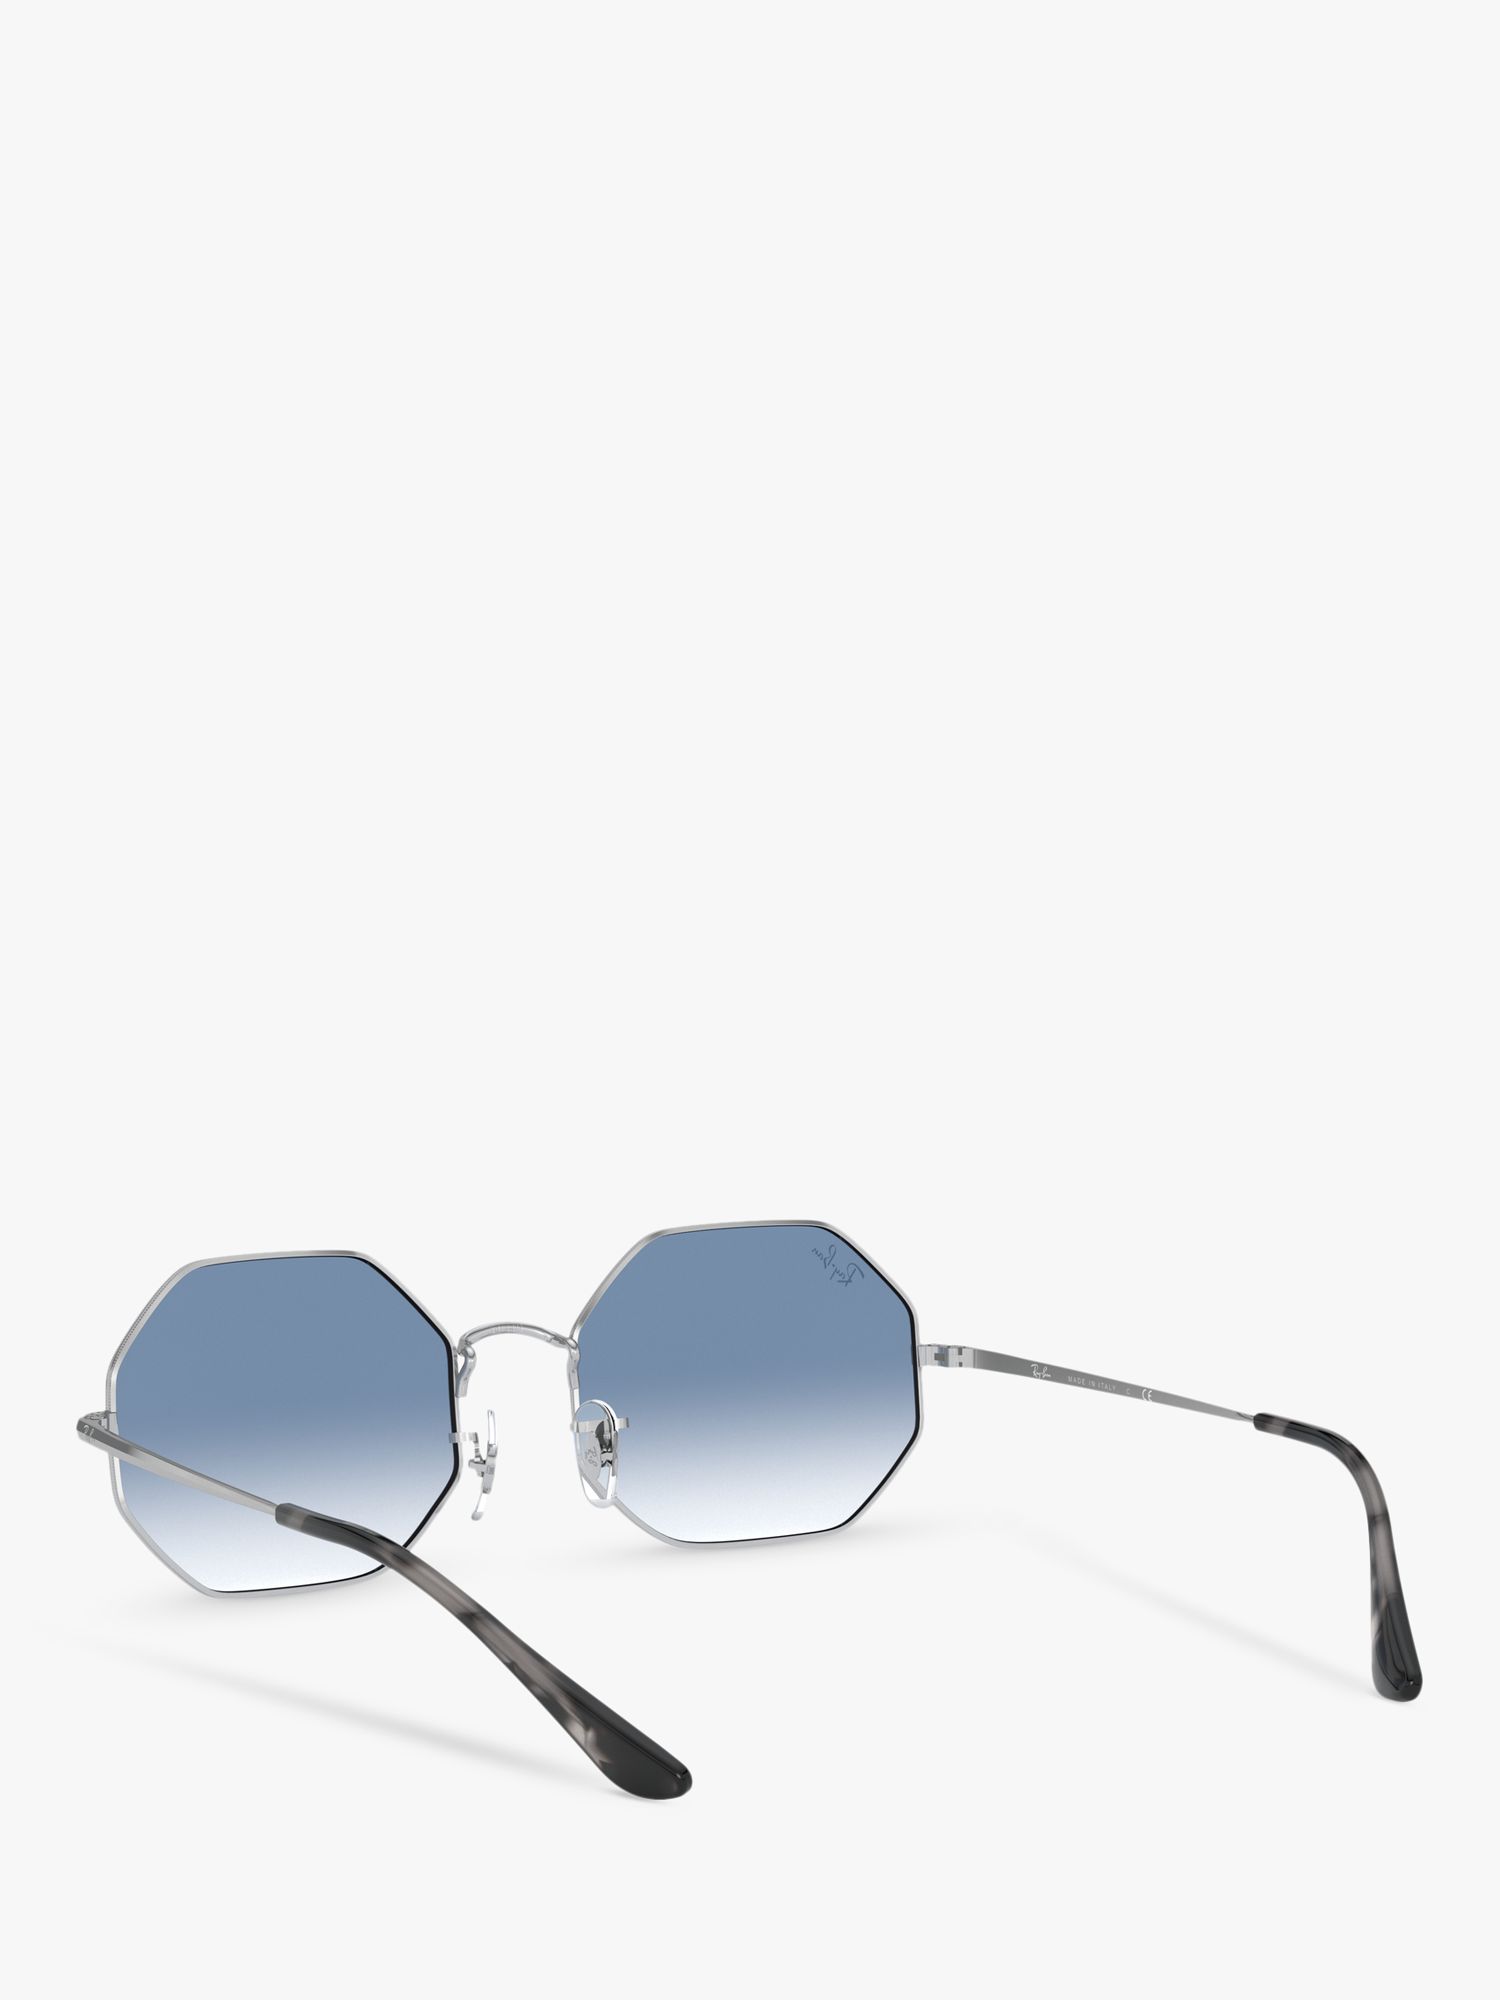 Buy Ray-Ban RB1972 Unisex Octagonal Sunglasses, Silver/Blue Gradient Online at johnlewis.com